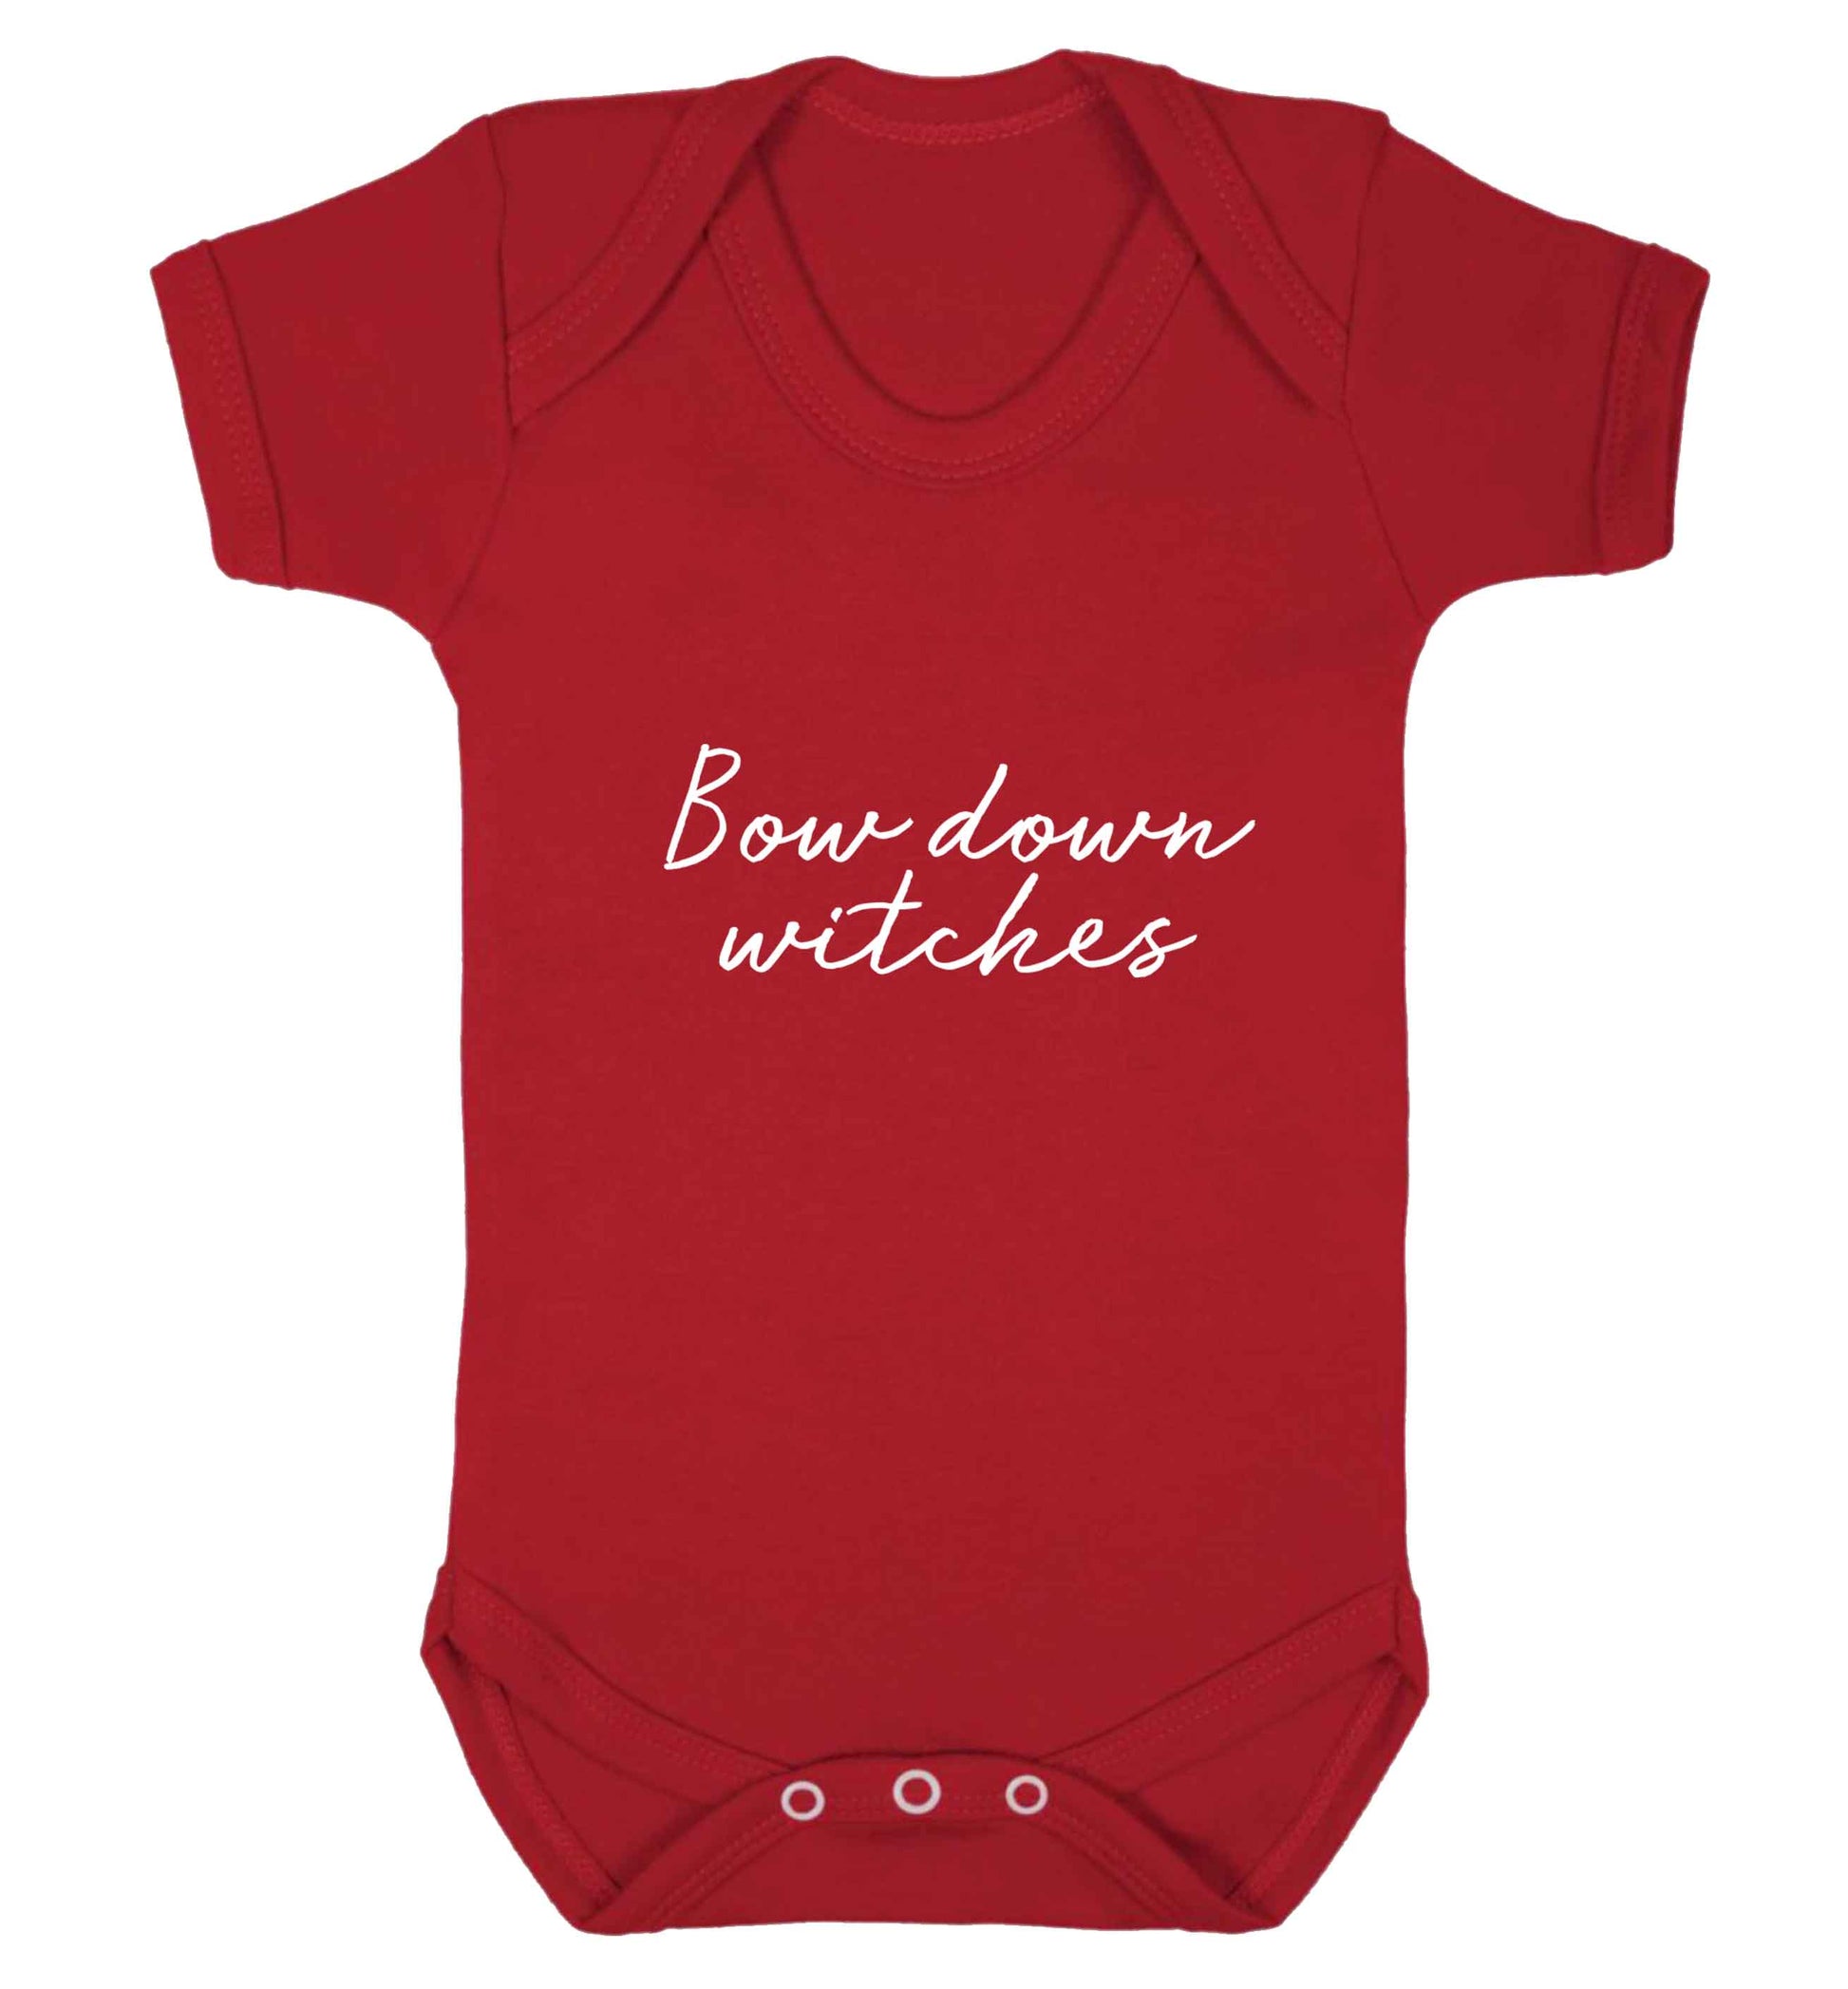 Bow down witches baby vest red 18-24 months